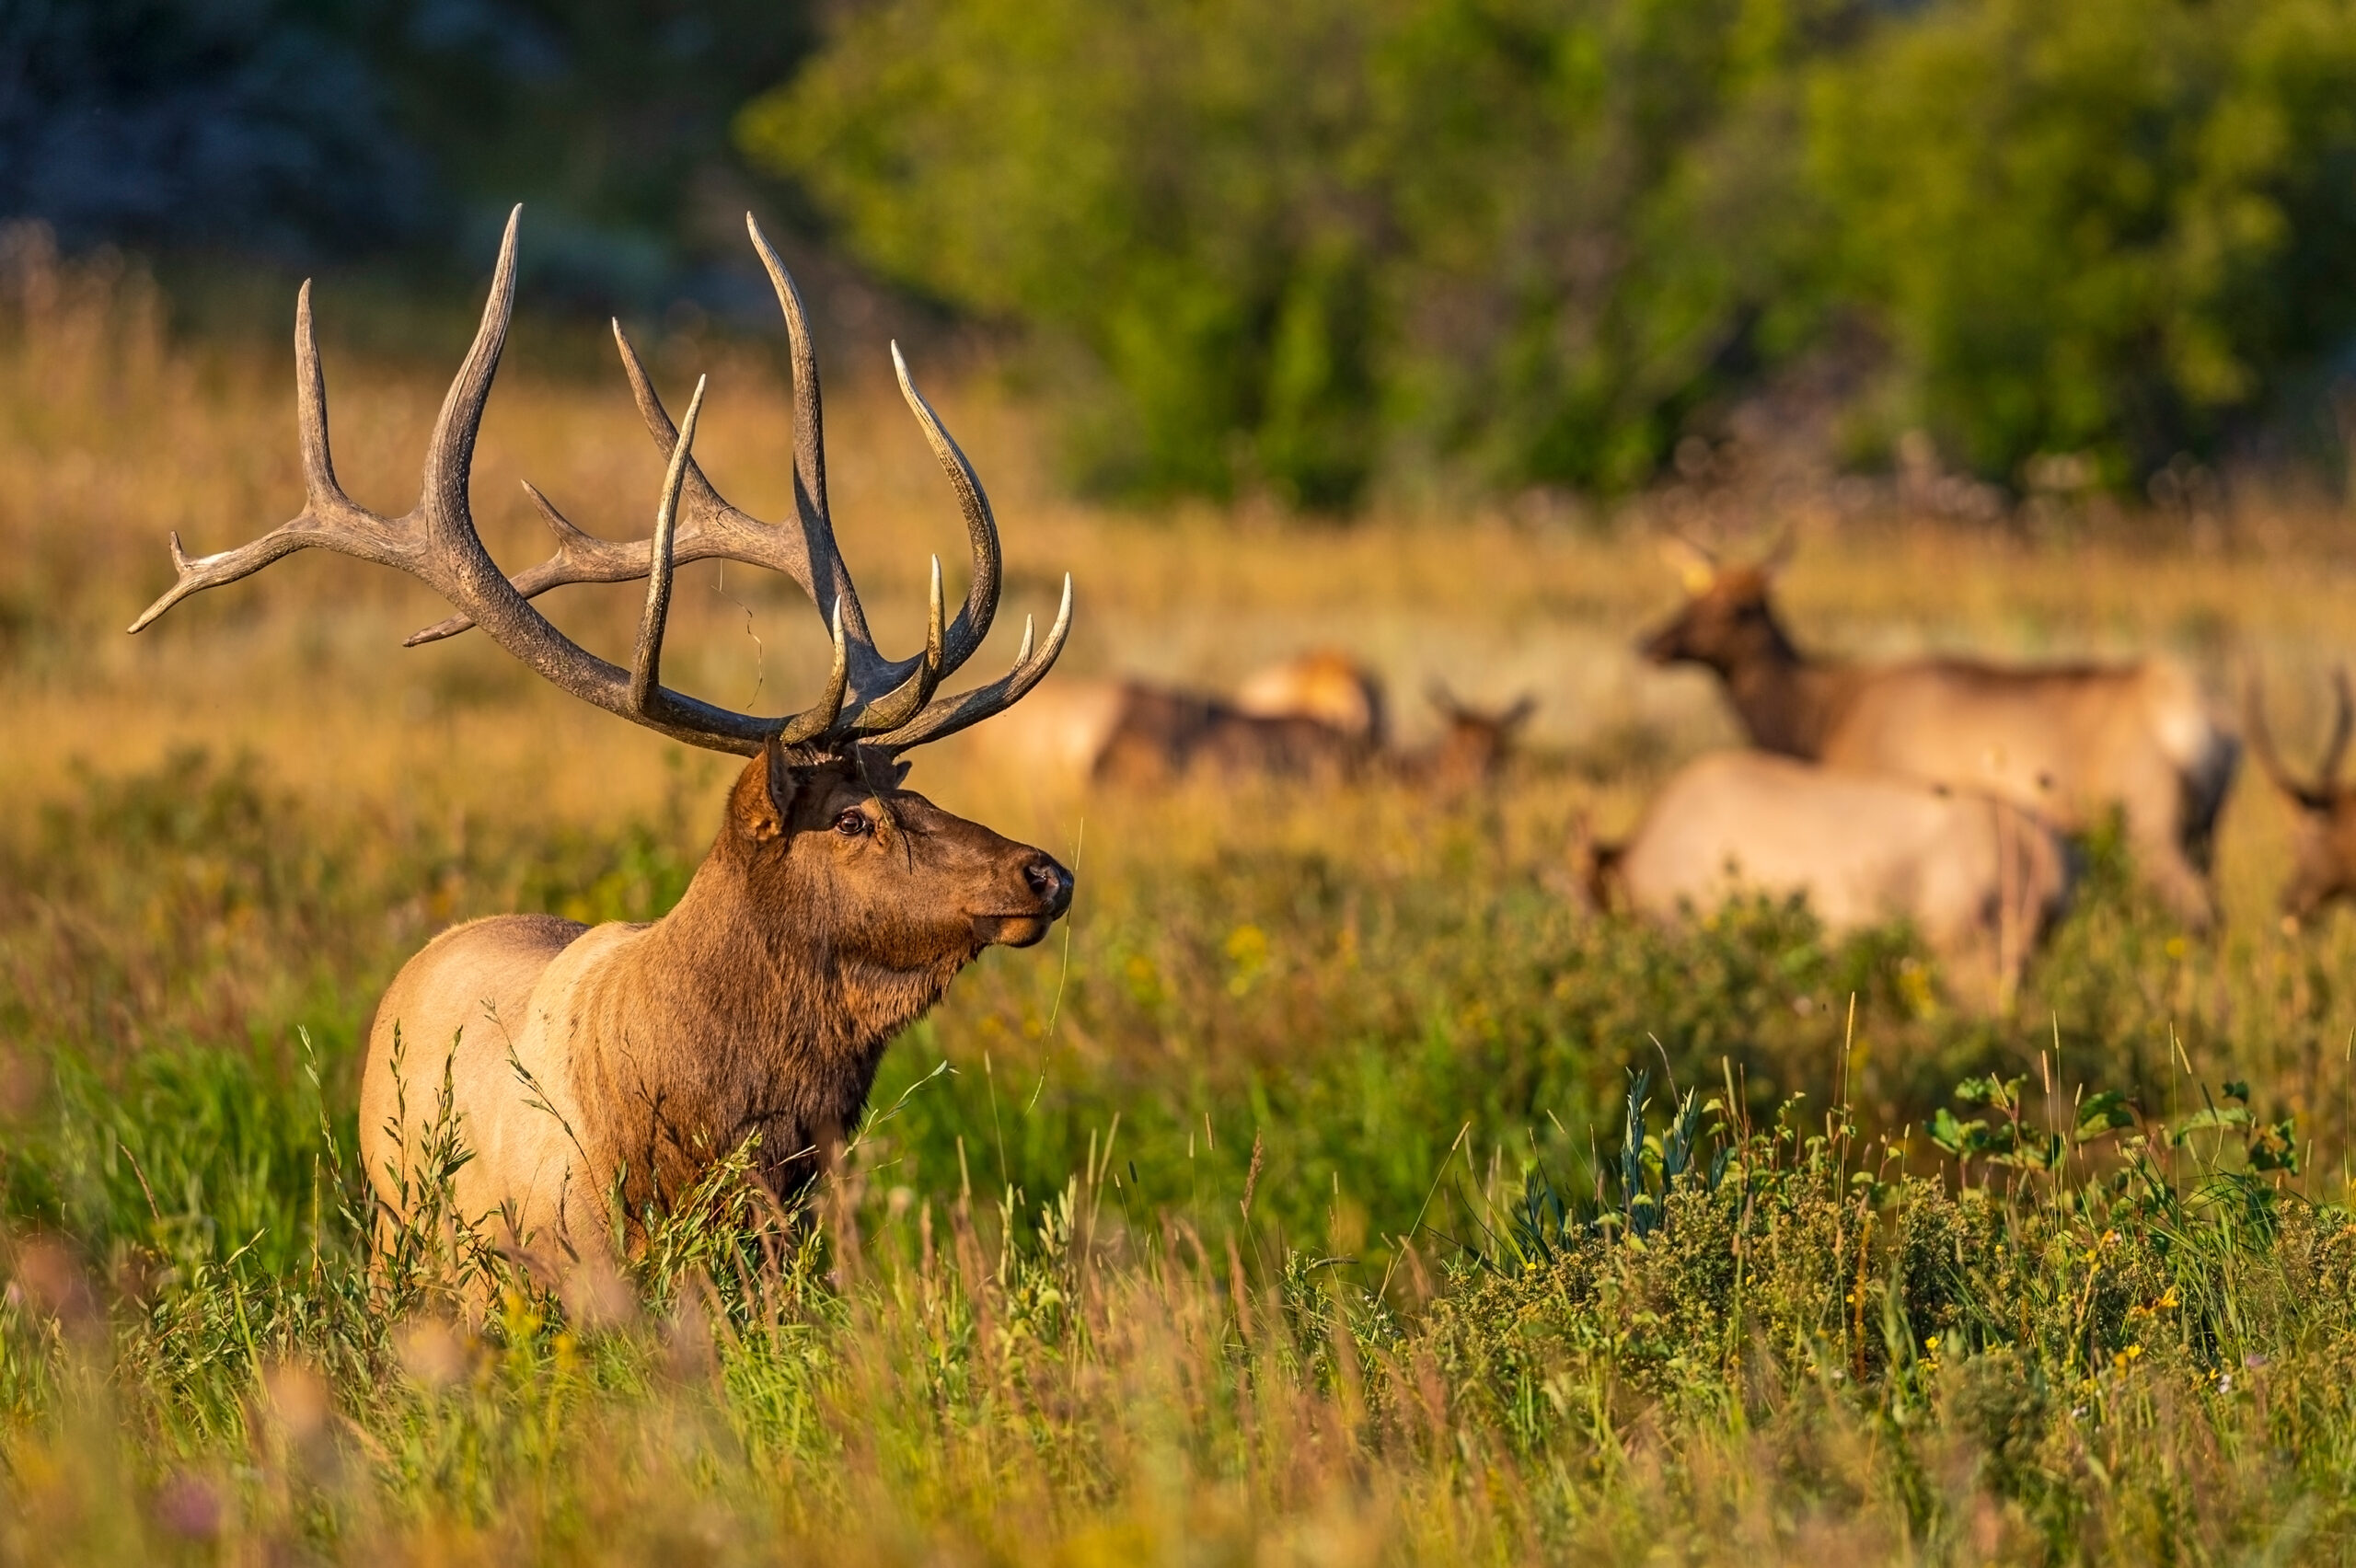 The bull elk known as Kahuna, photographed by Dawn Wilson in 2021.